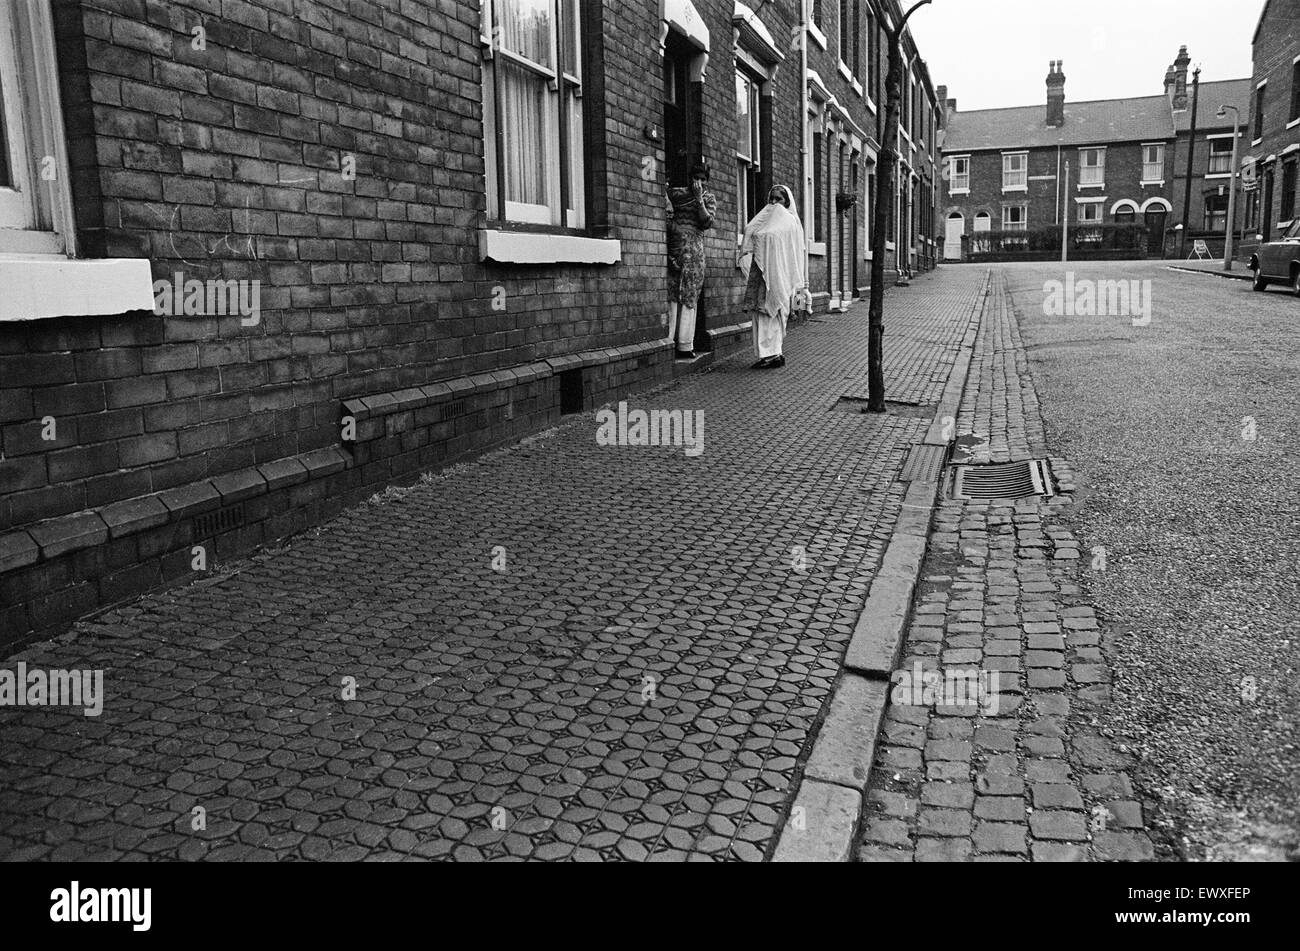 Image result for smethwick marshall street old photos